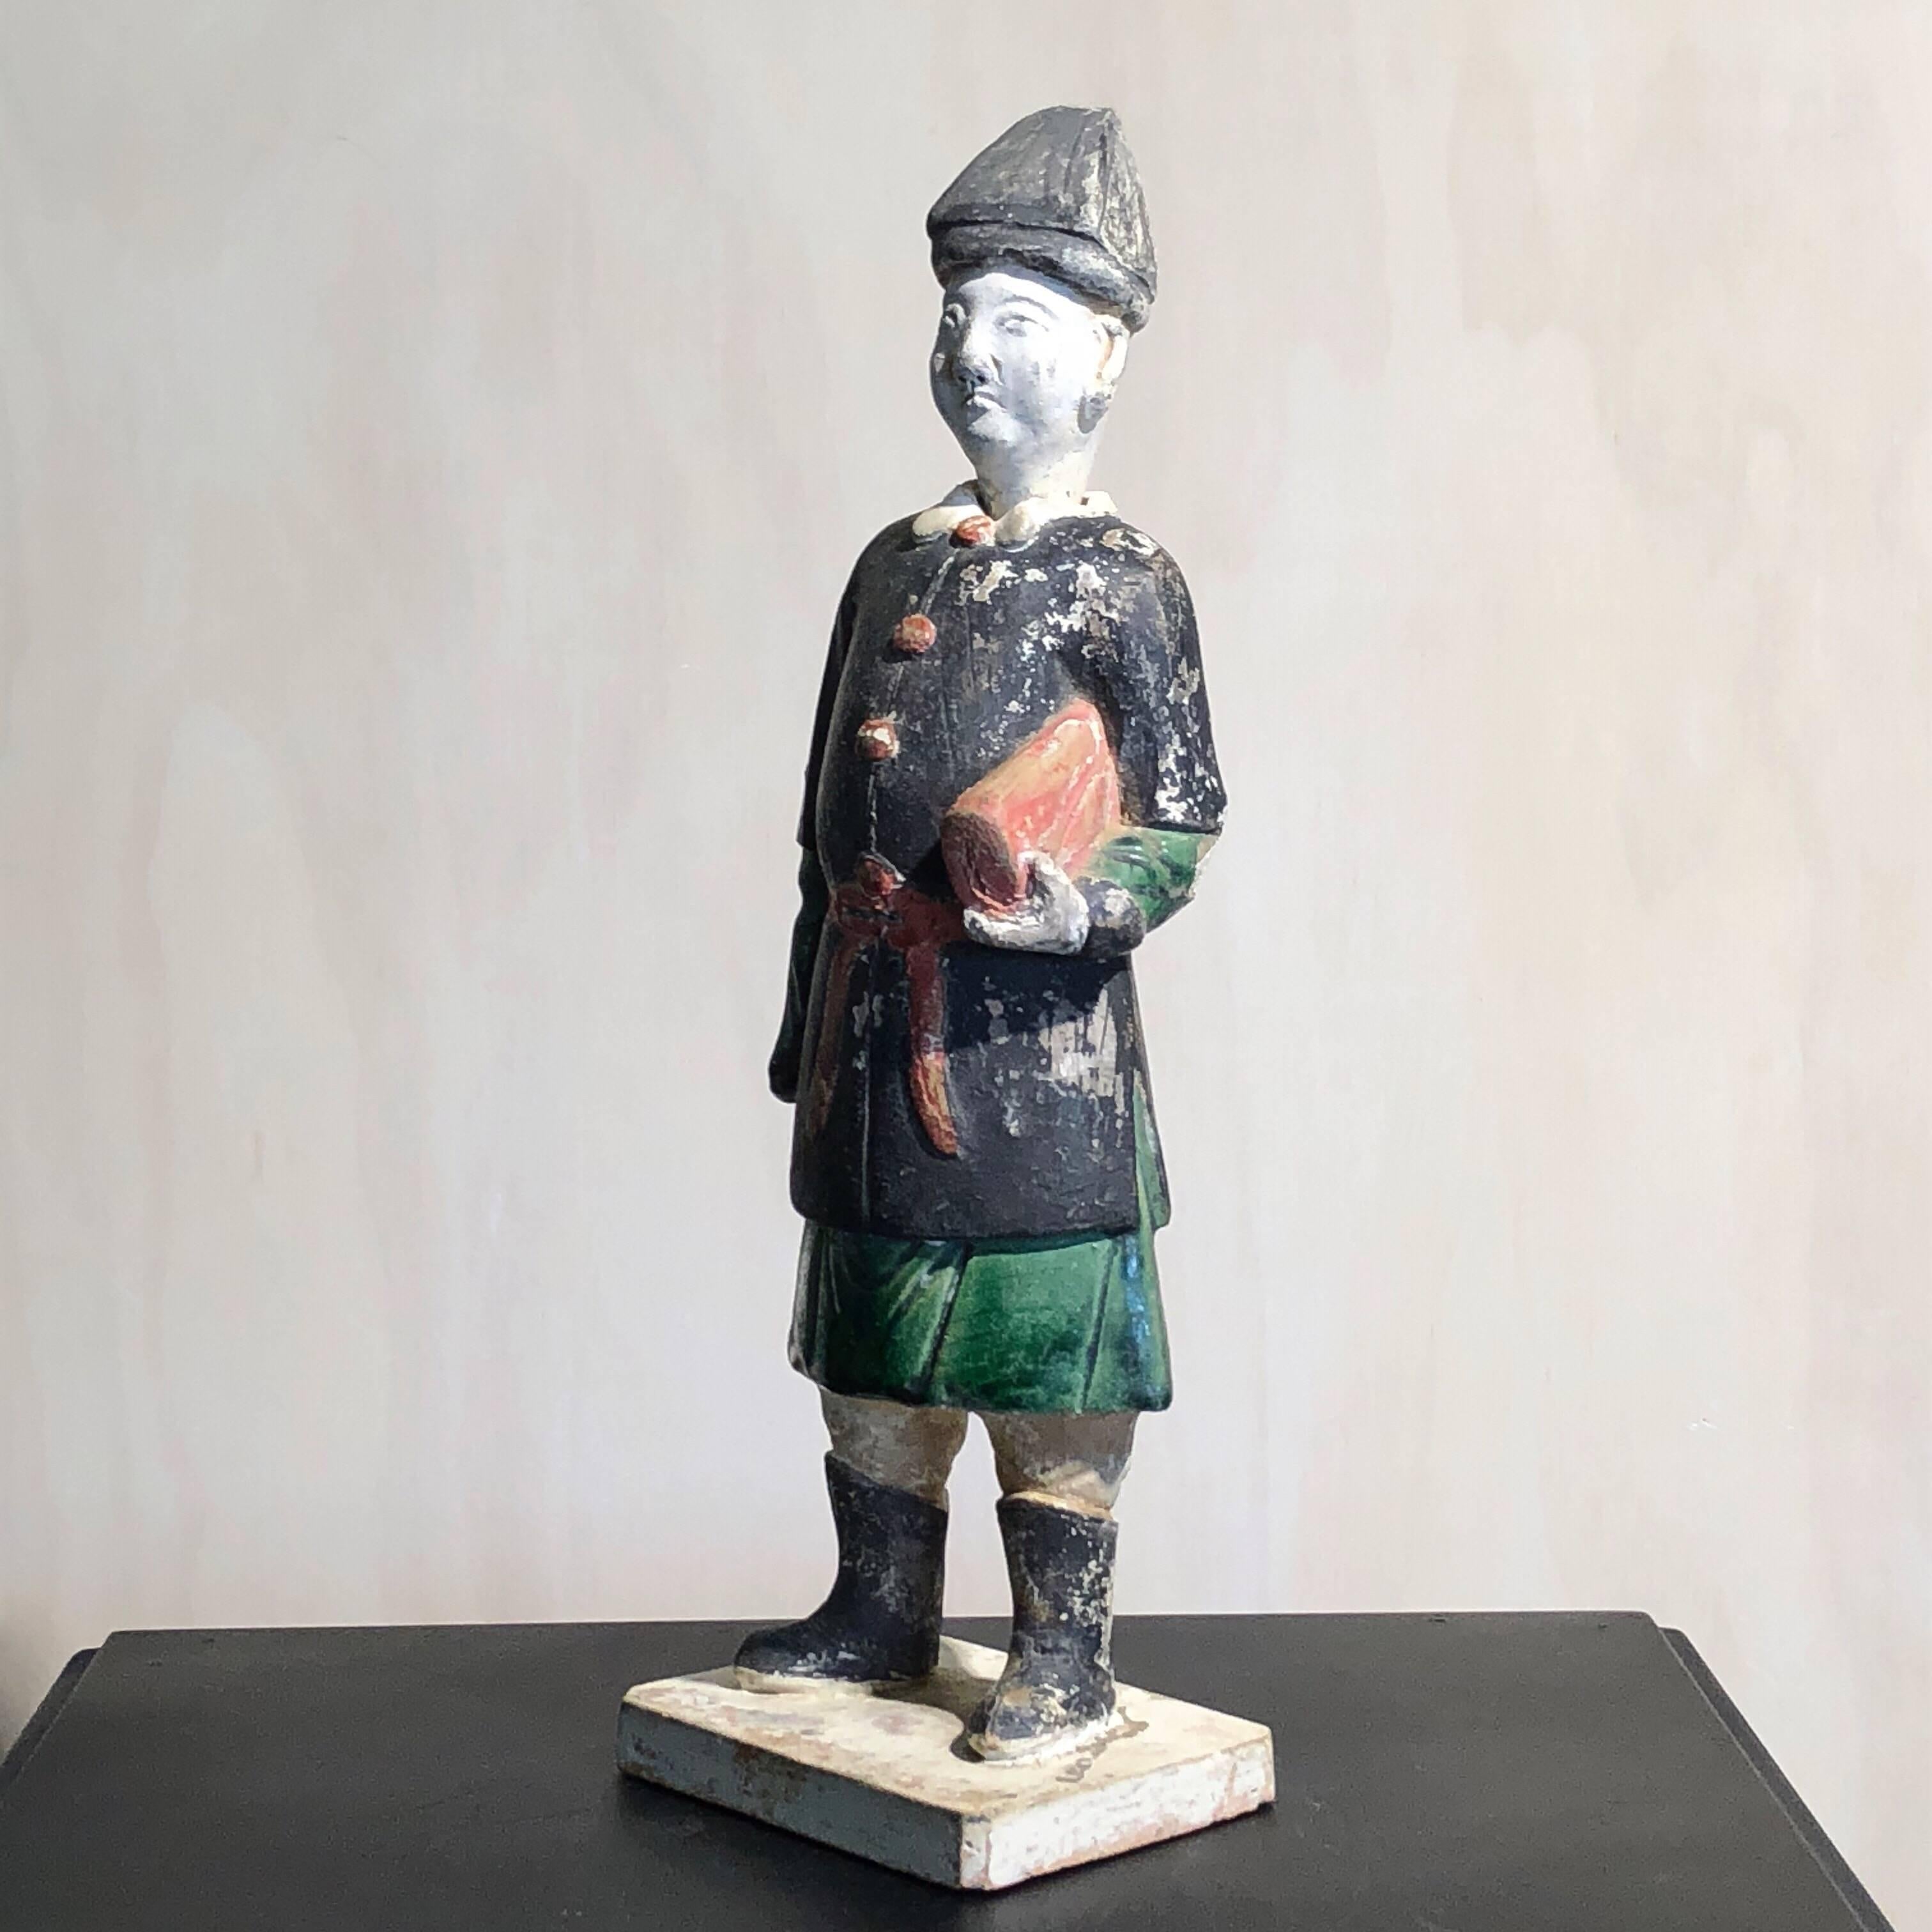 Chinese pottery official, the partially glazed figure standing with bundle of goods beneath one arm, wearing a black painted overcoat with red buttons and sash over a green glazed tunic, his head separate.

